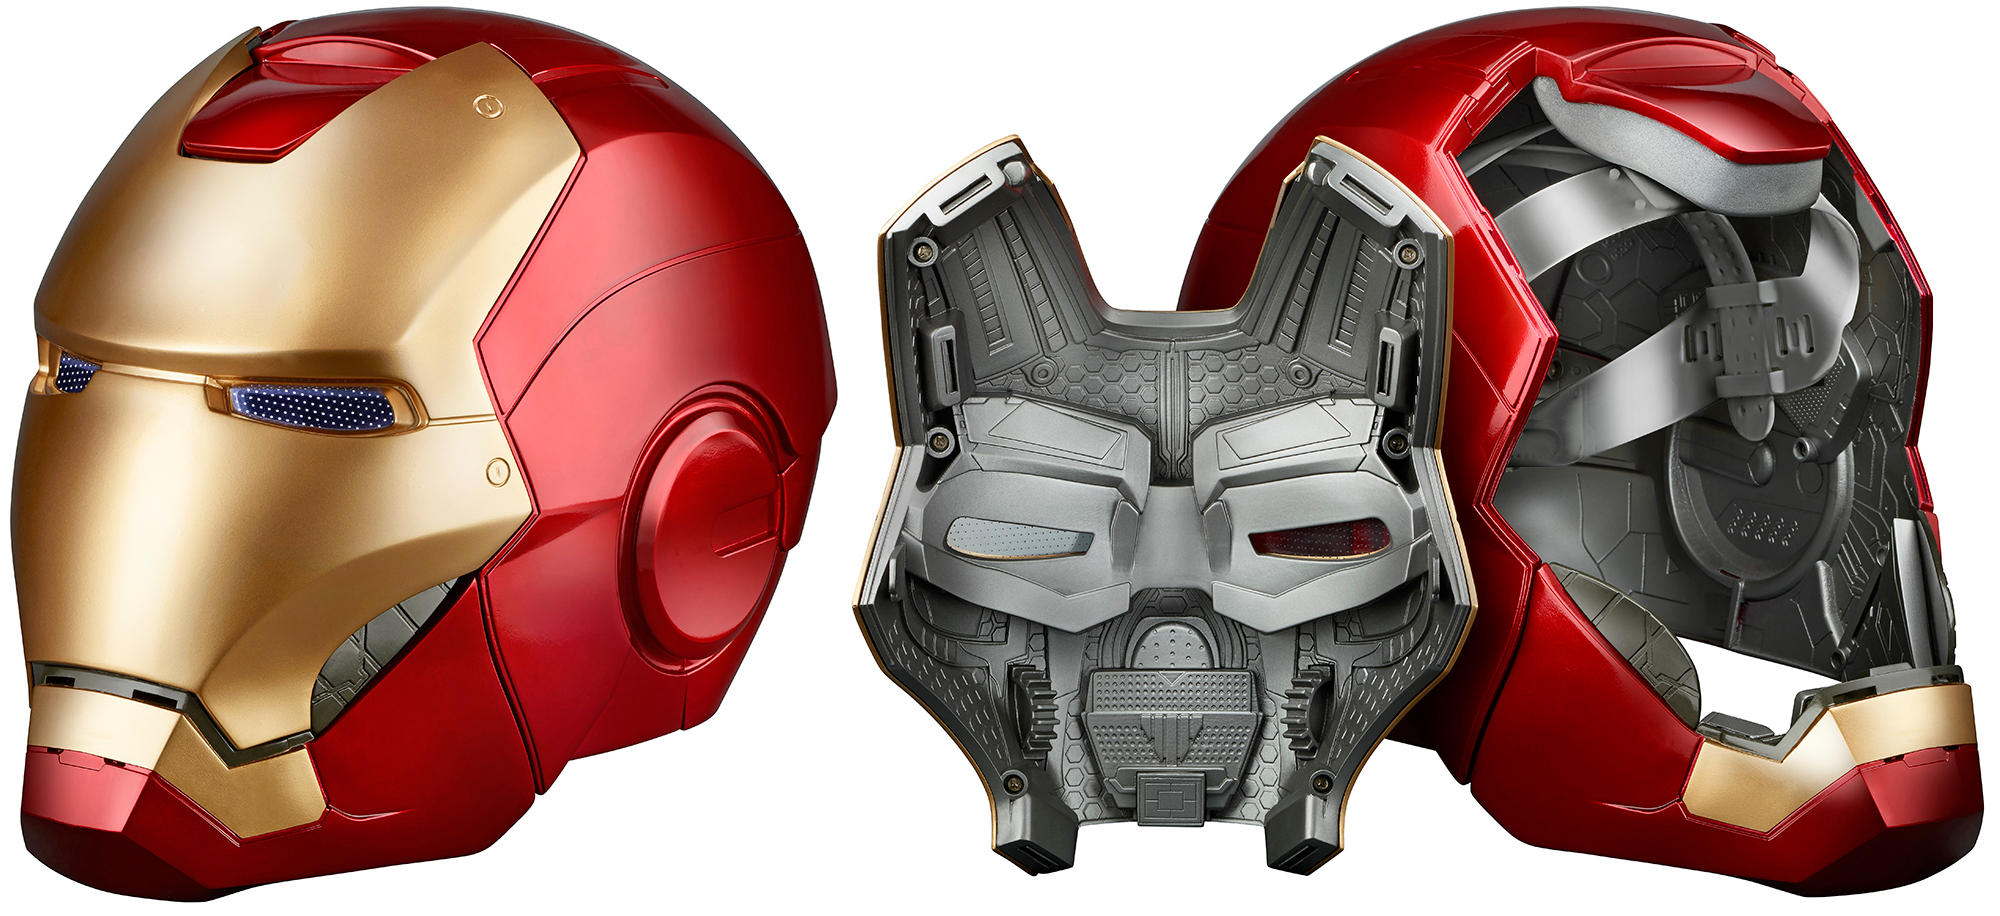 Hasbro And Marvel Are Now Making Beautifully Detailed But Affordable Role Play Accessories